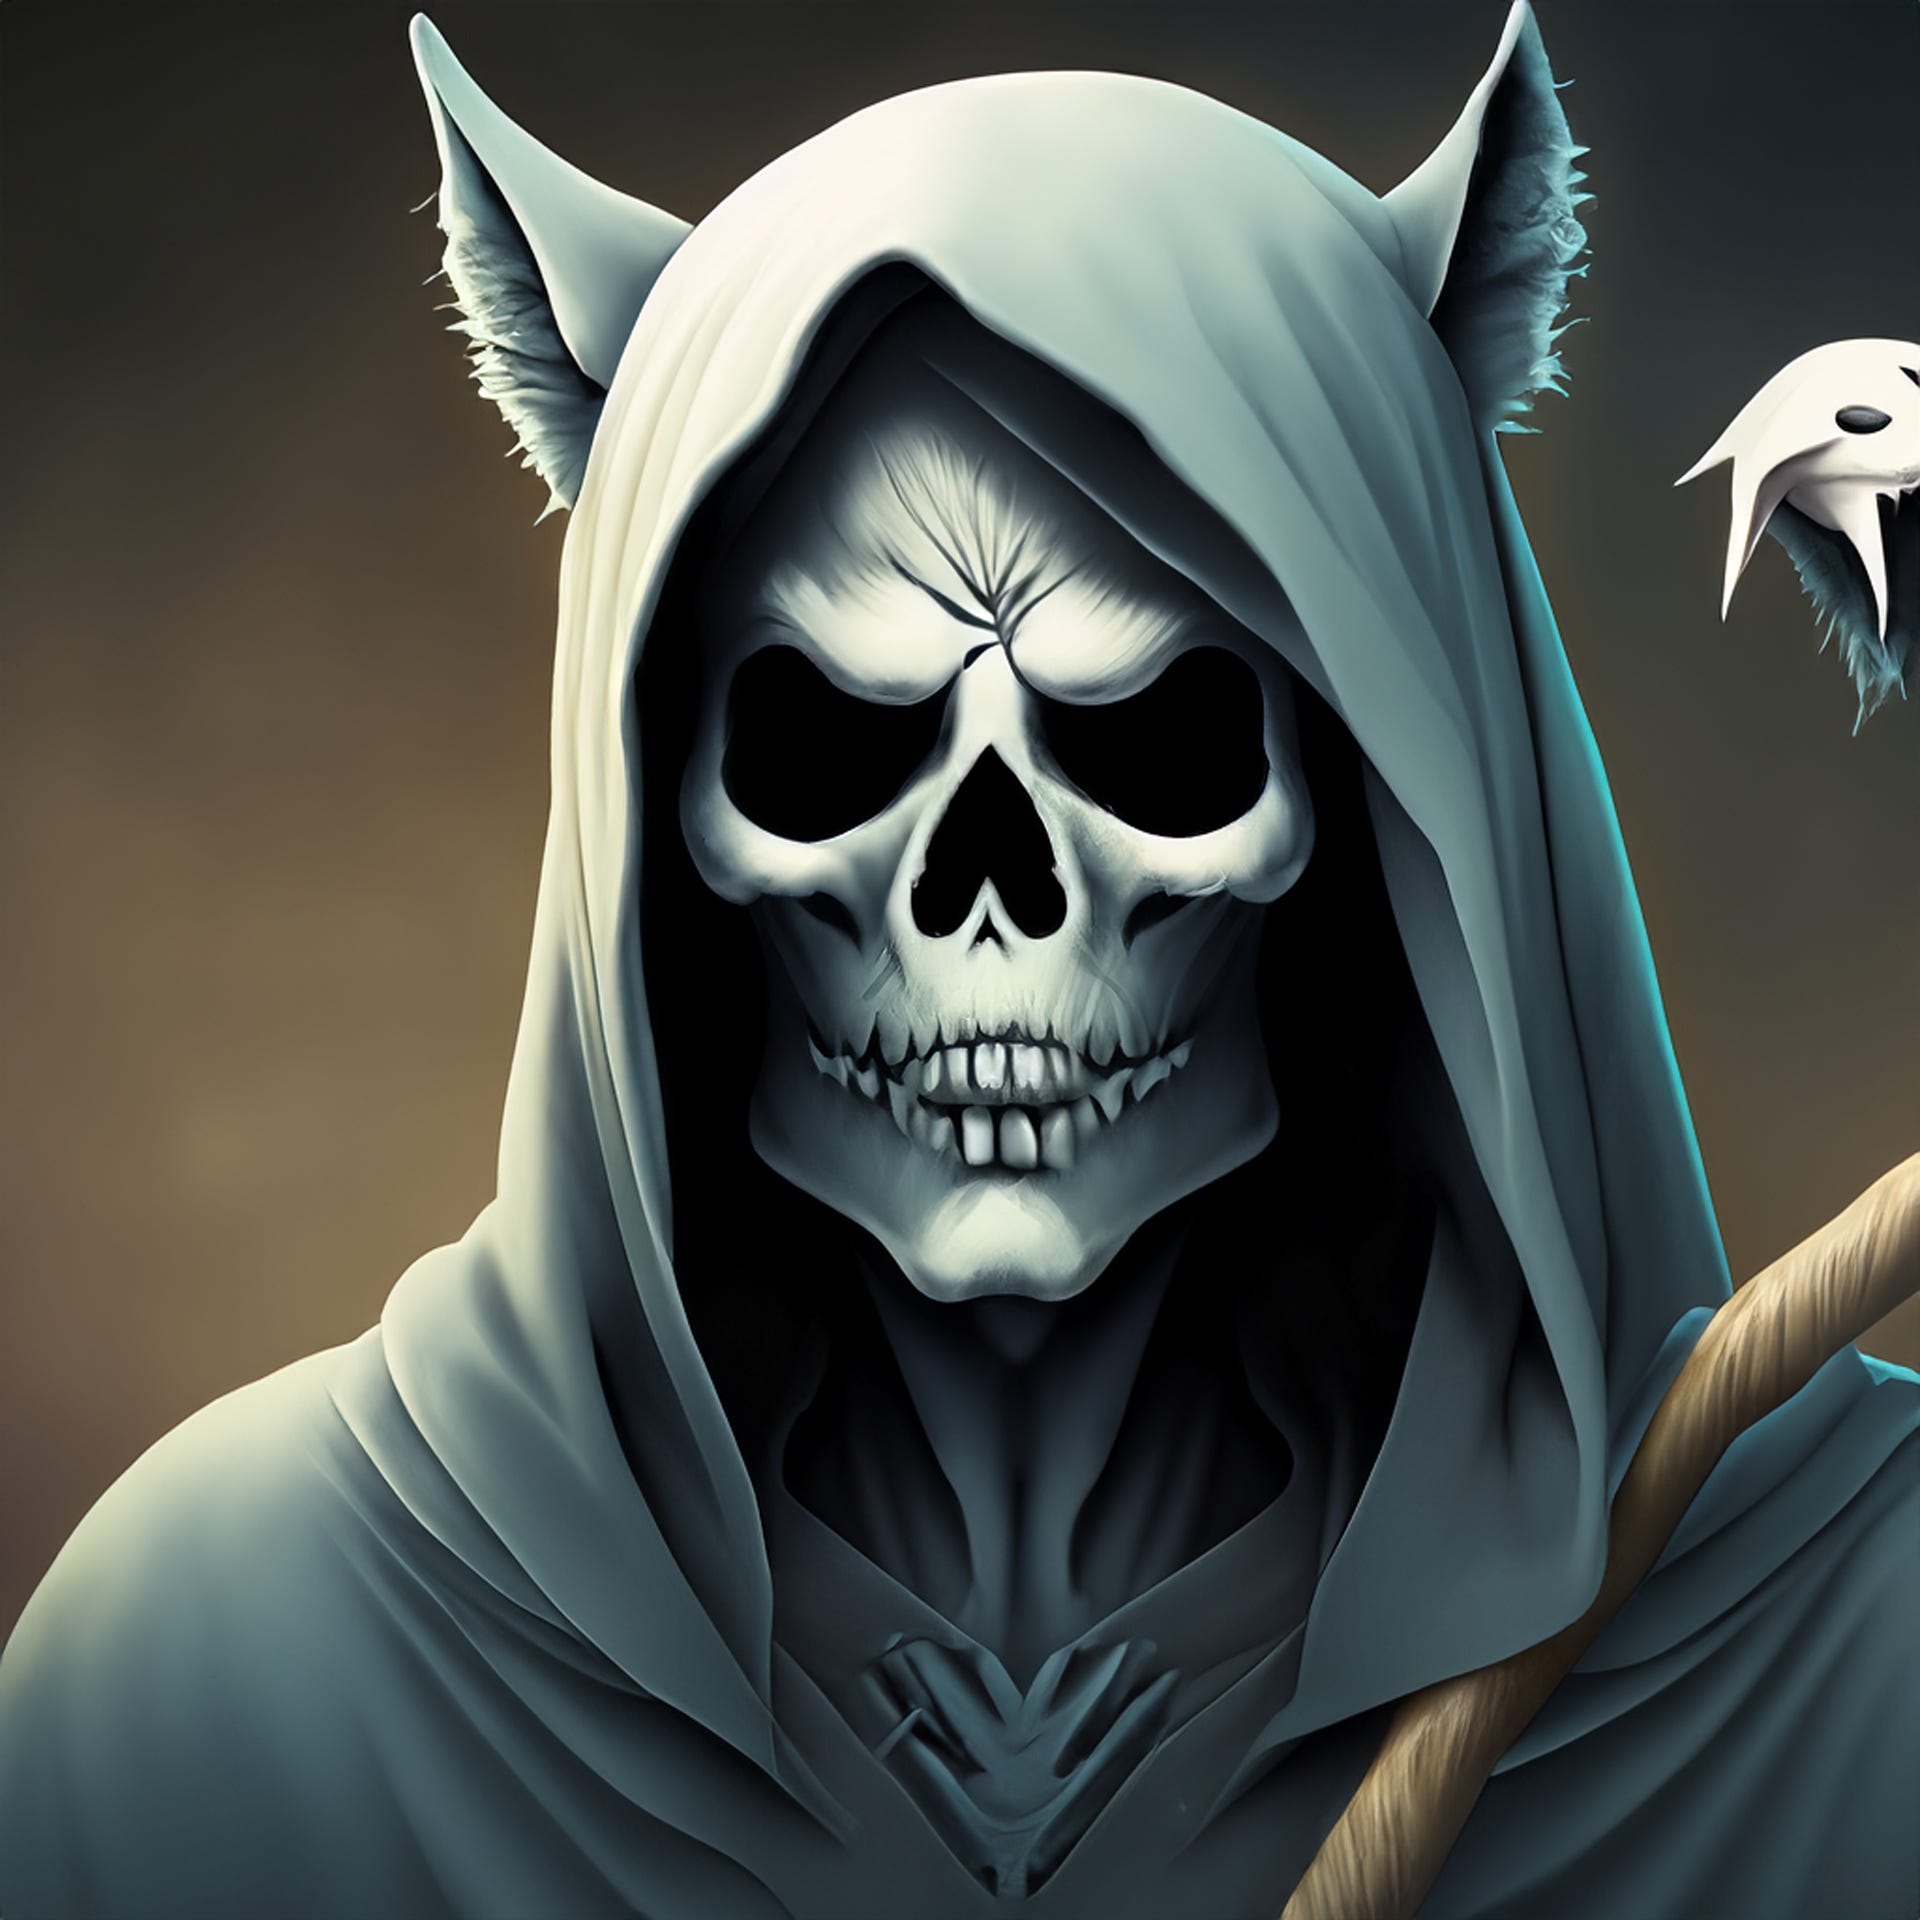 The Grim Reaper Born Again: Death in Story and Life